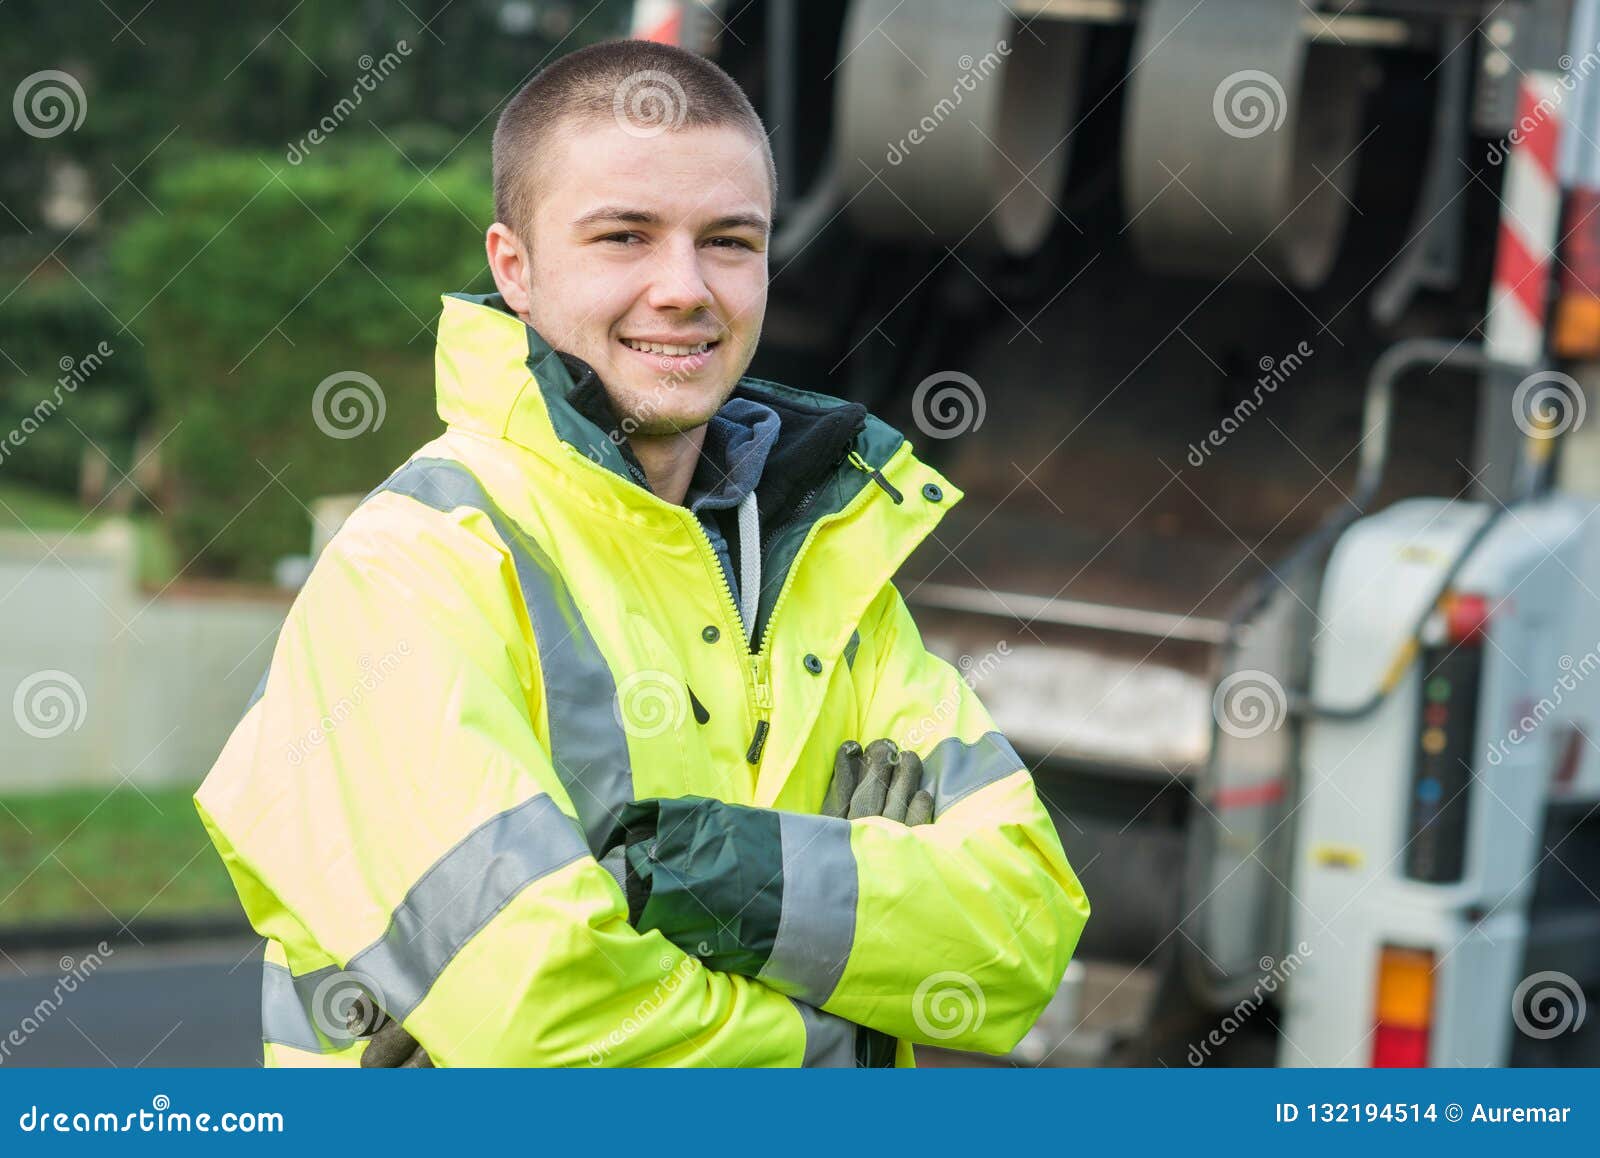 young municipal garbage collector near garbage truck